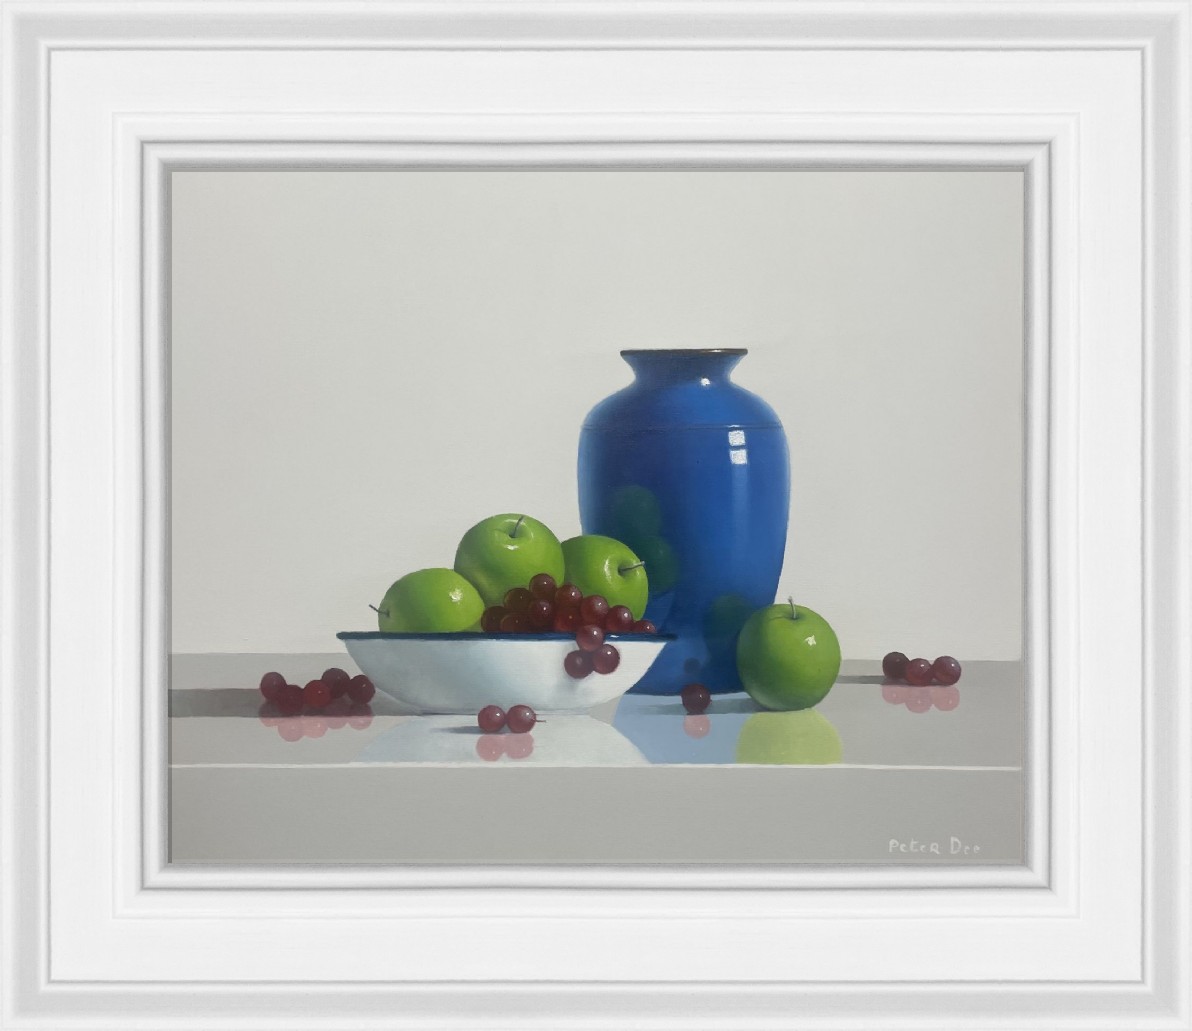 Blue Vase and White Bowl with Apples and Grapes by Peter Dee